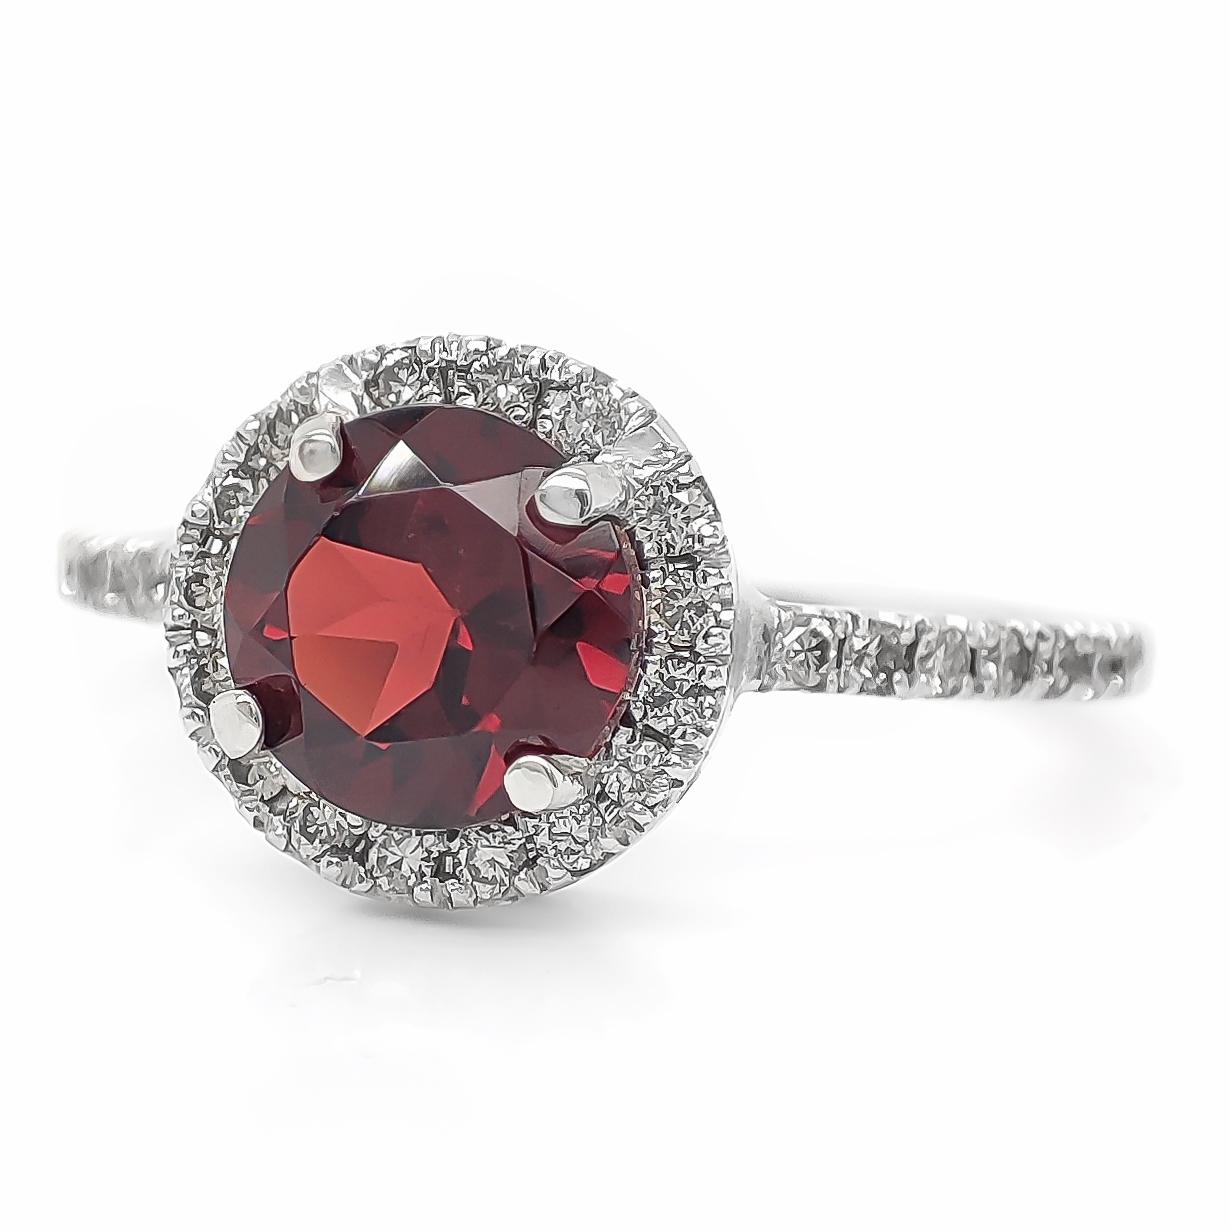 Round Cut NO RESERVE 1.28CTW Garnet and Diamond Engagement Ring 14K White Gold For Sale